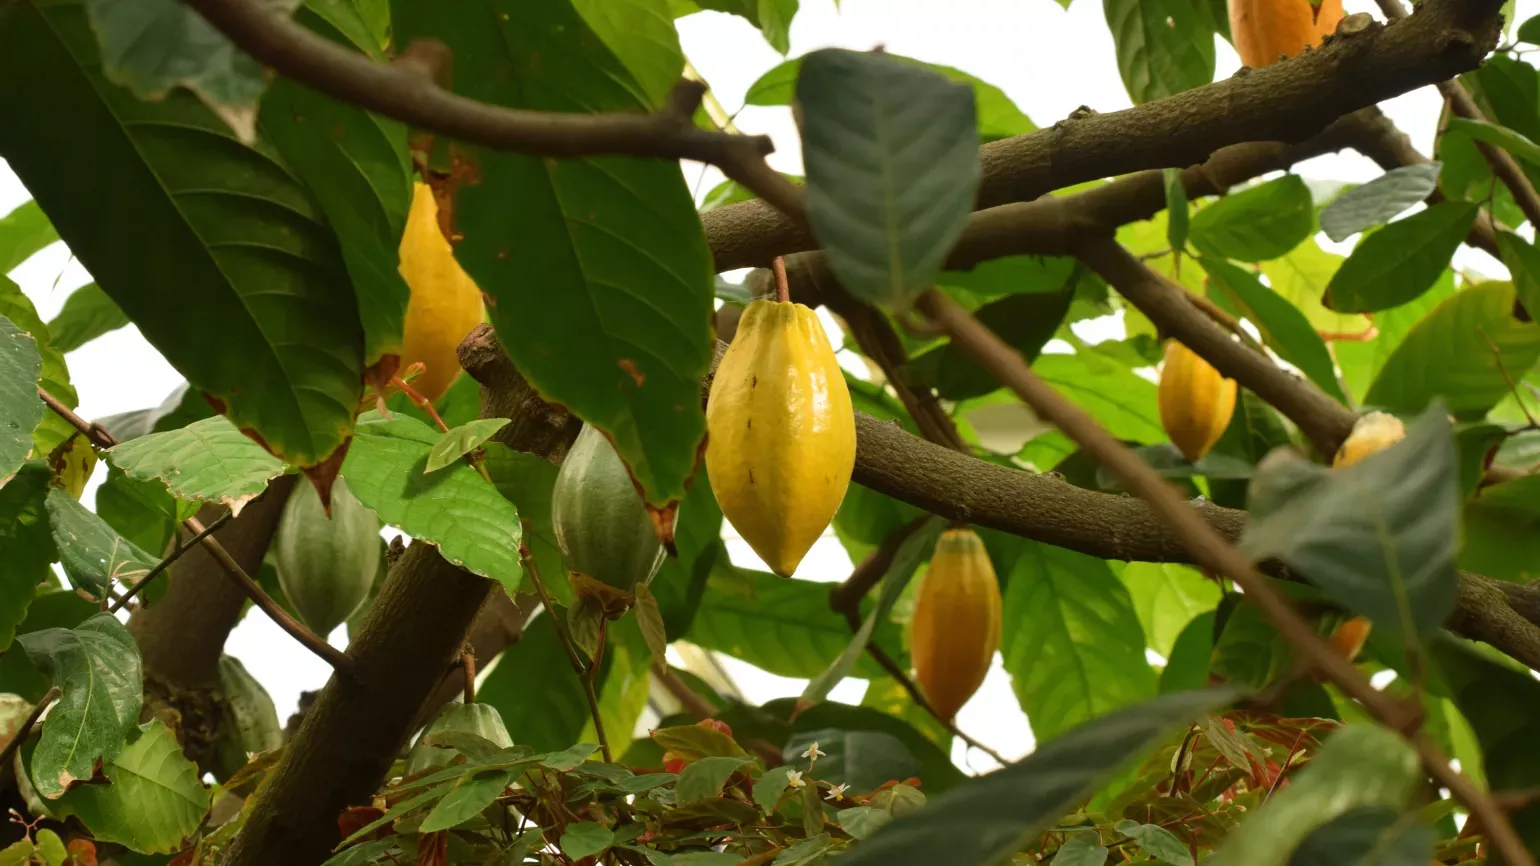 Yellow and green cacao pods